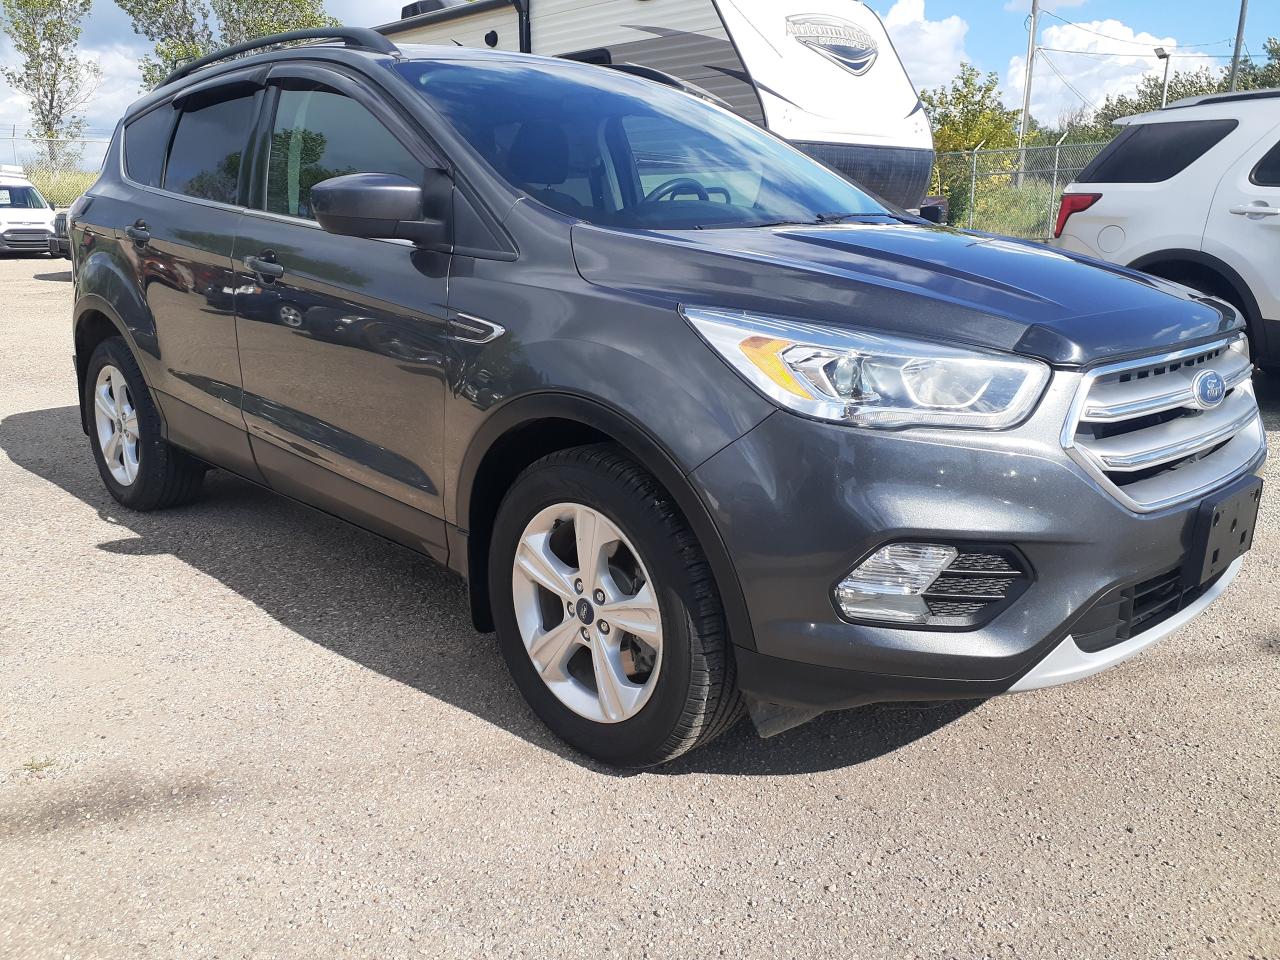 2017 Ford Escape SE AWD Large BU Cam, Htd Seats, Power Seat - Photo #1